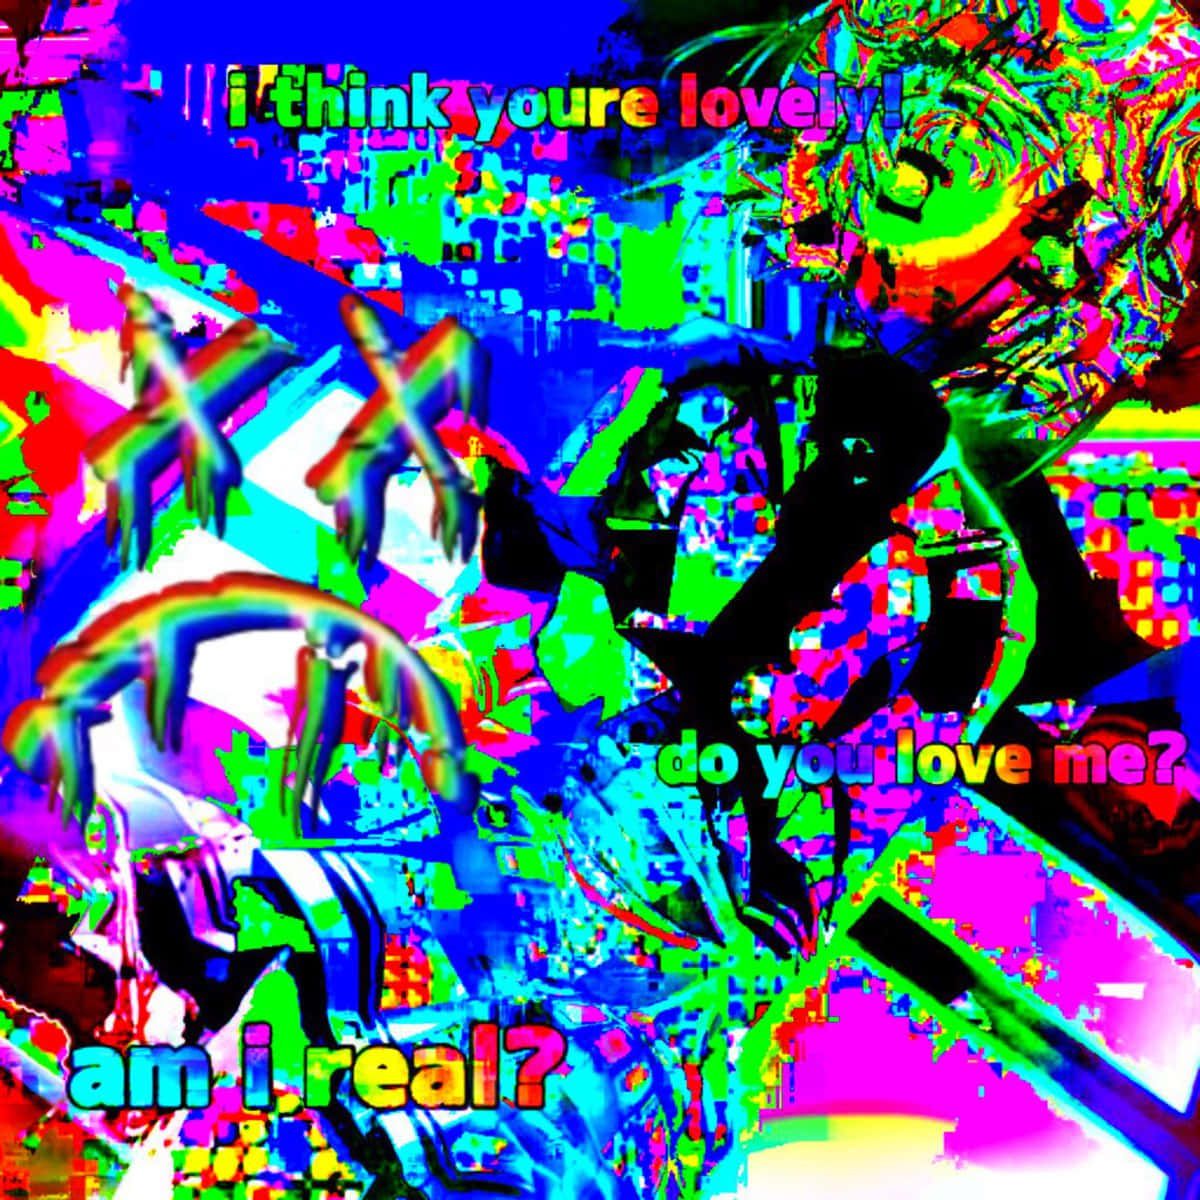 An abstract image with text that reads 